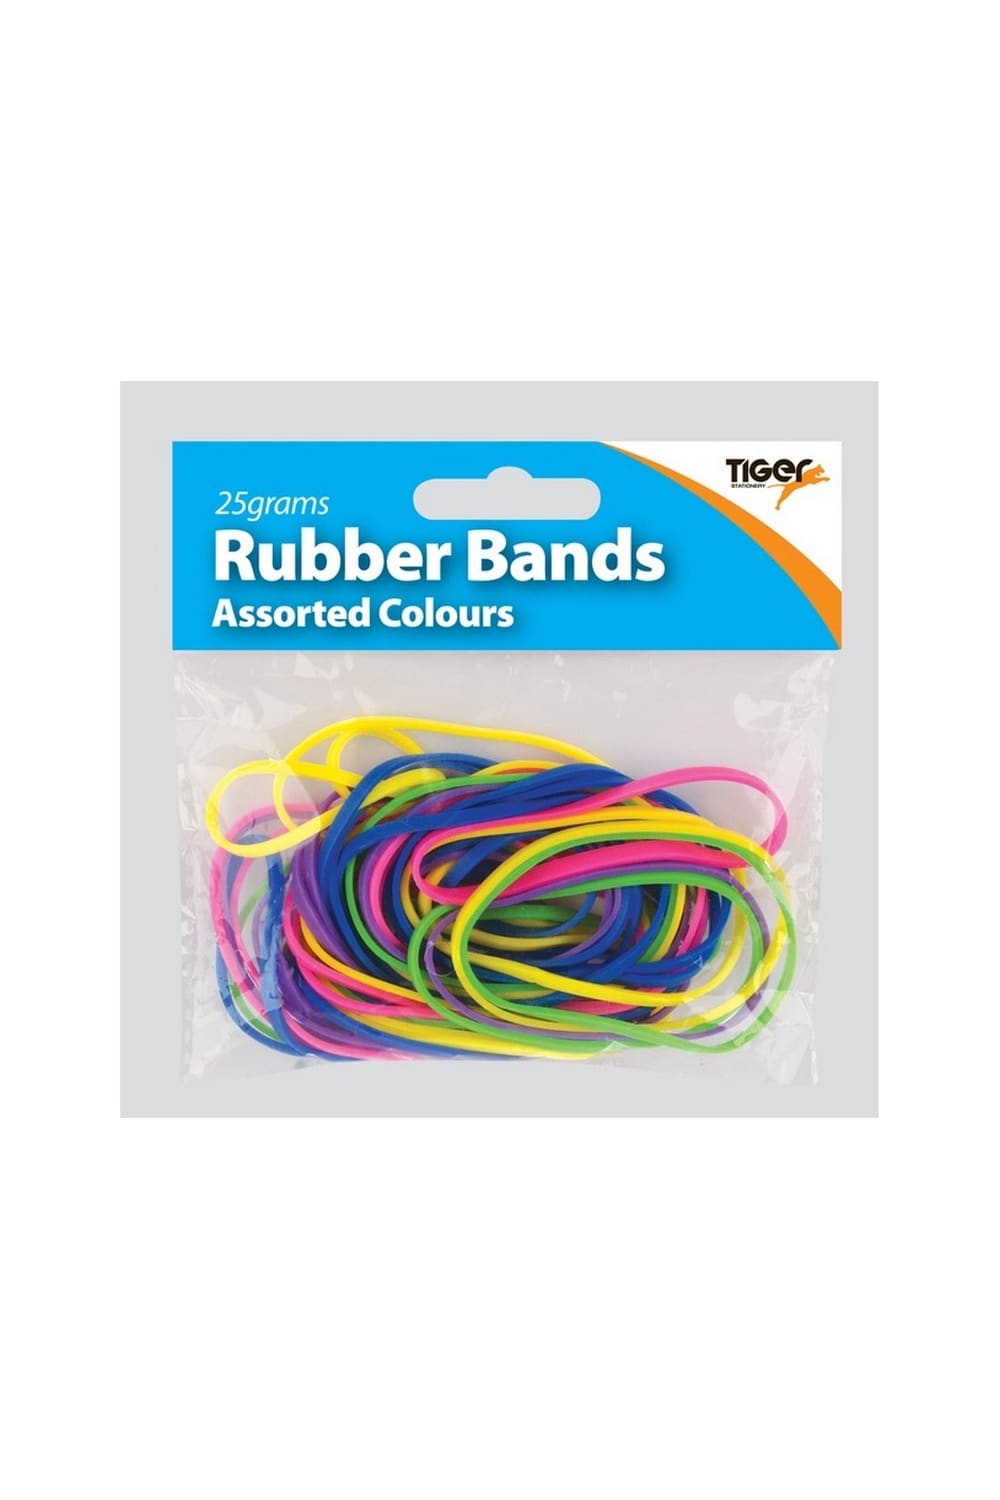 Tiger Rubber Bands (Multicolored) (One Size)